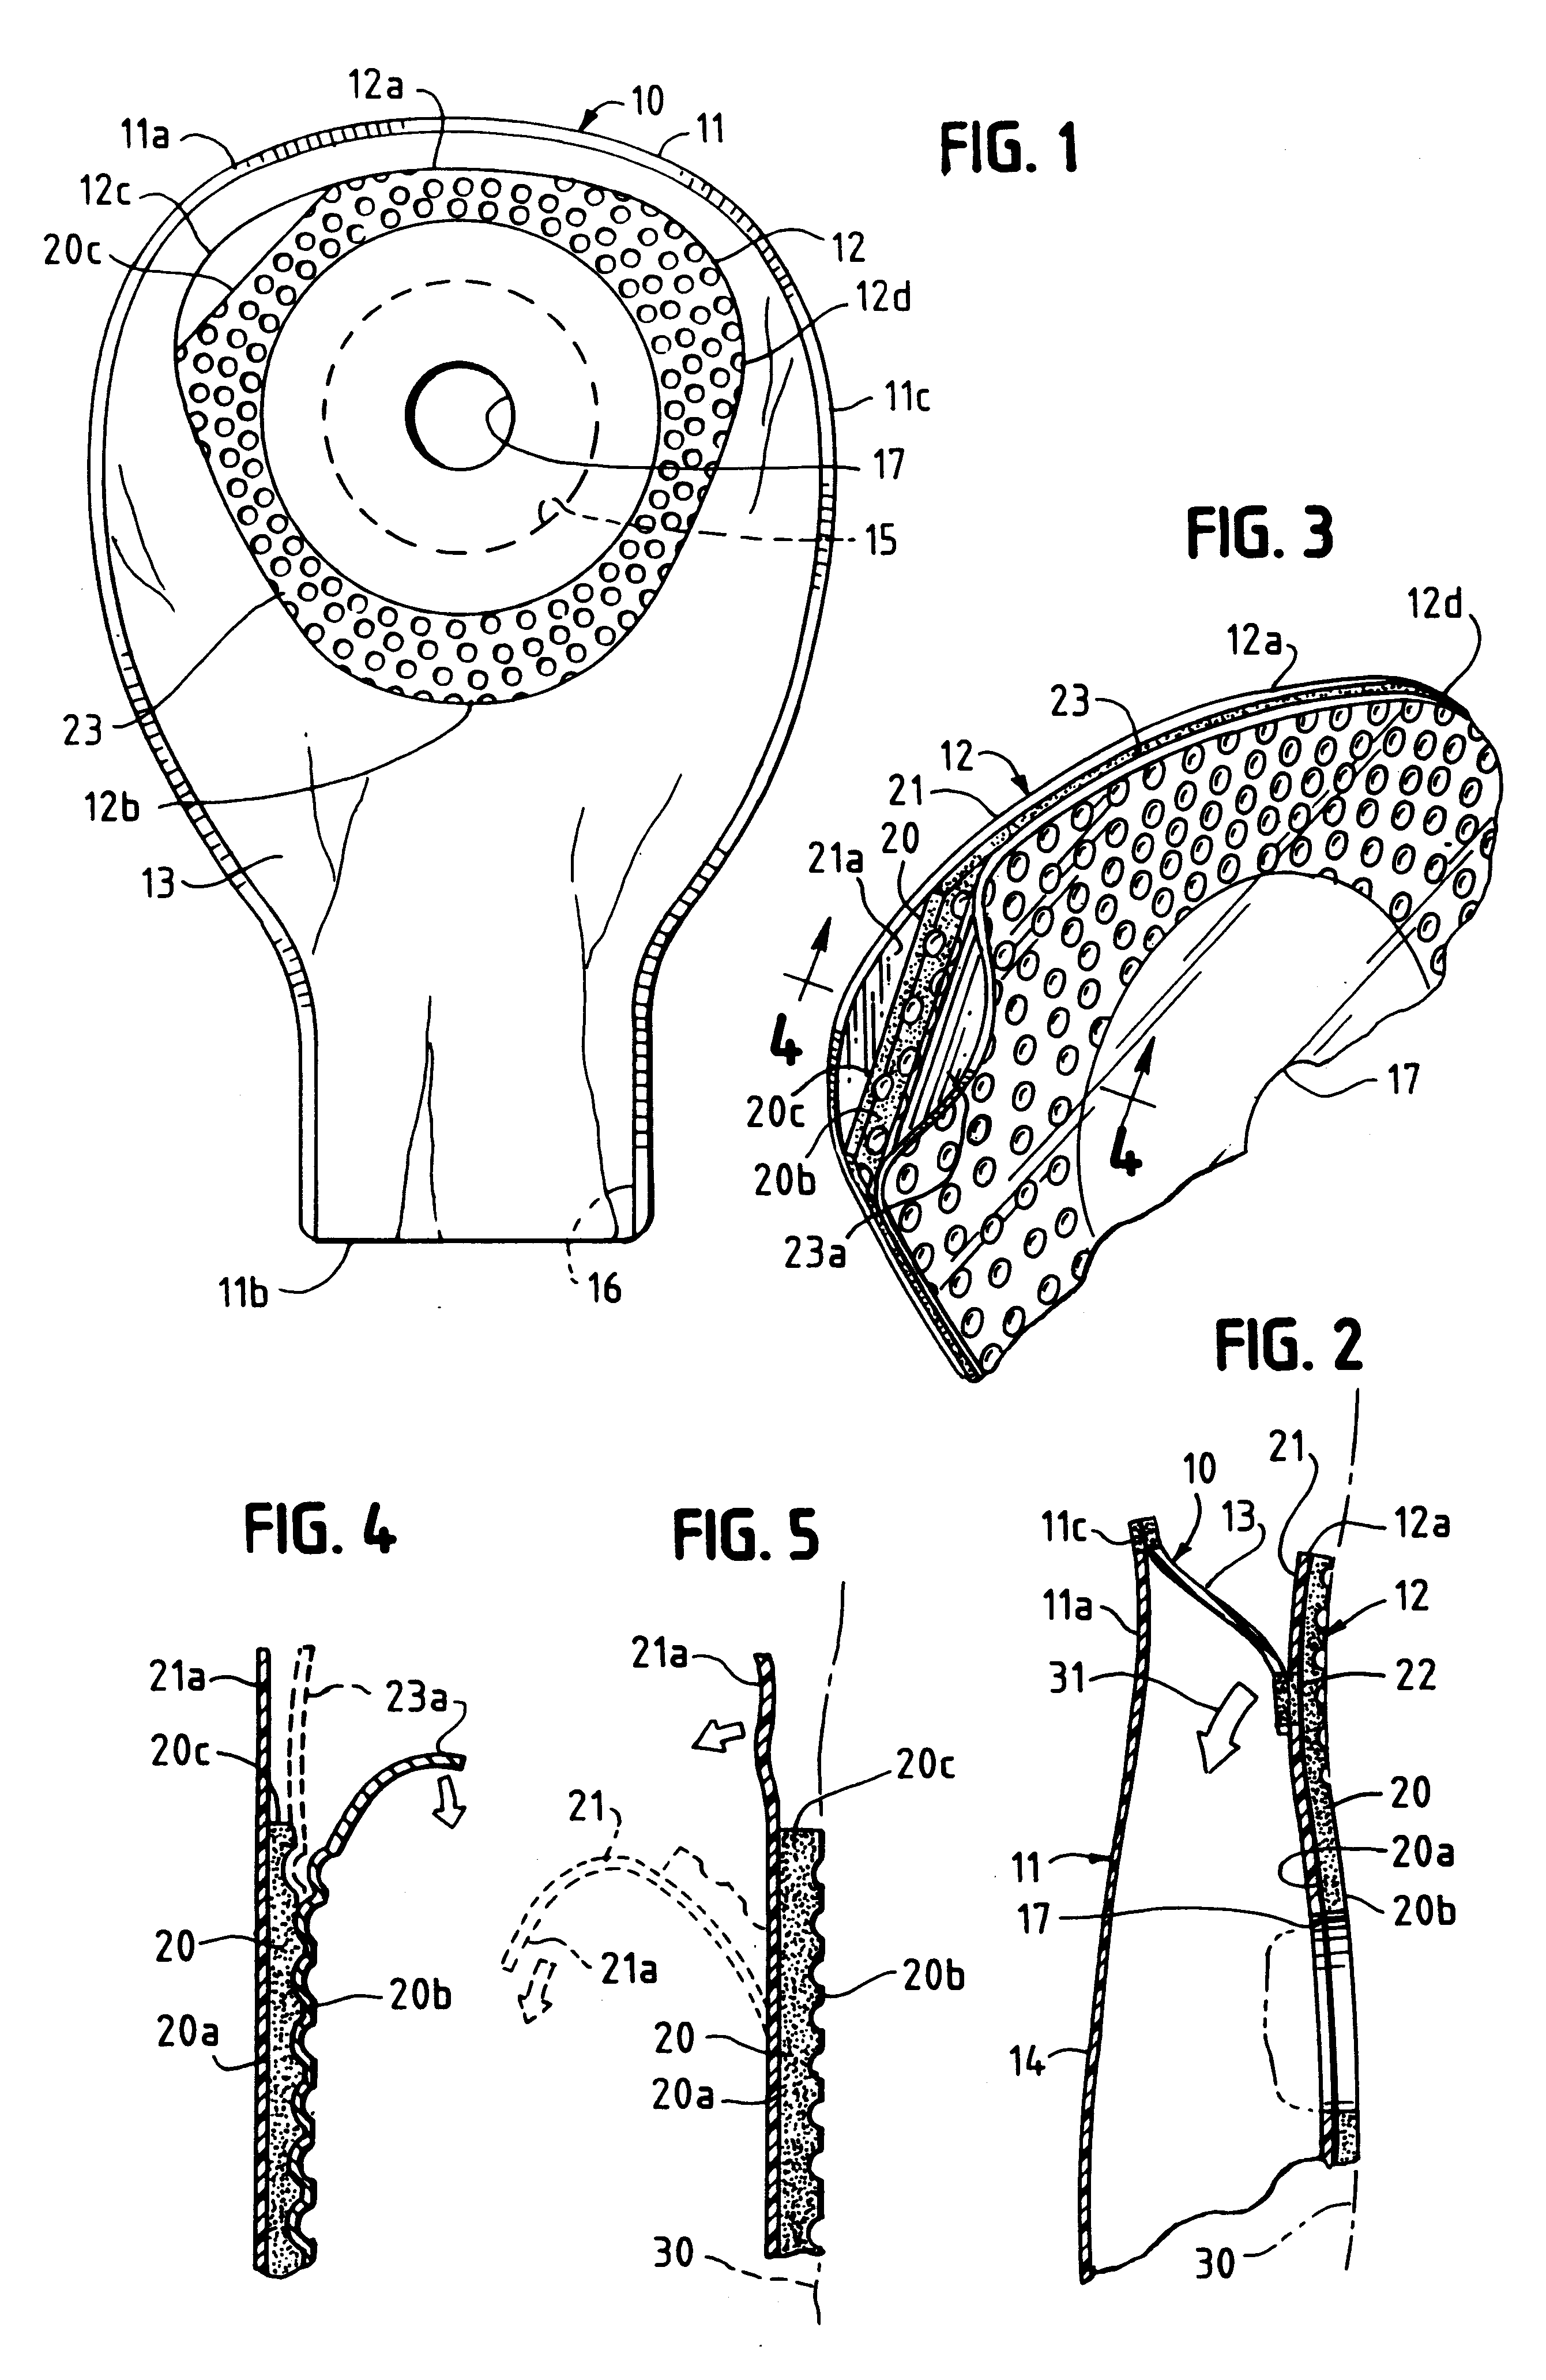 Ostomy appliance with inverted triangular faceplate and non-protruding pull tabs